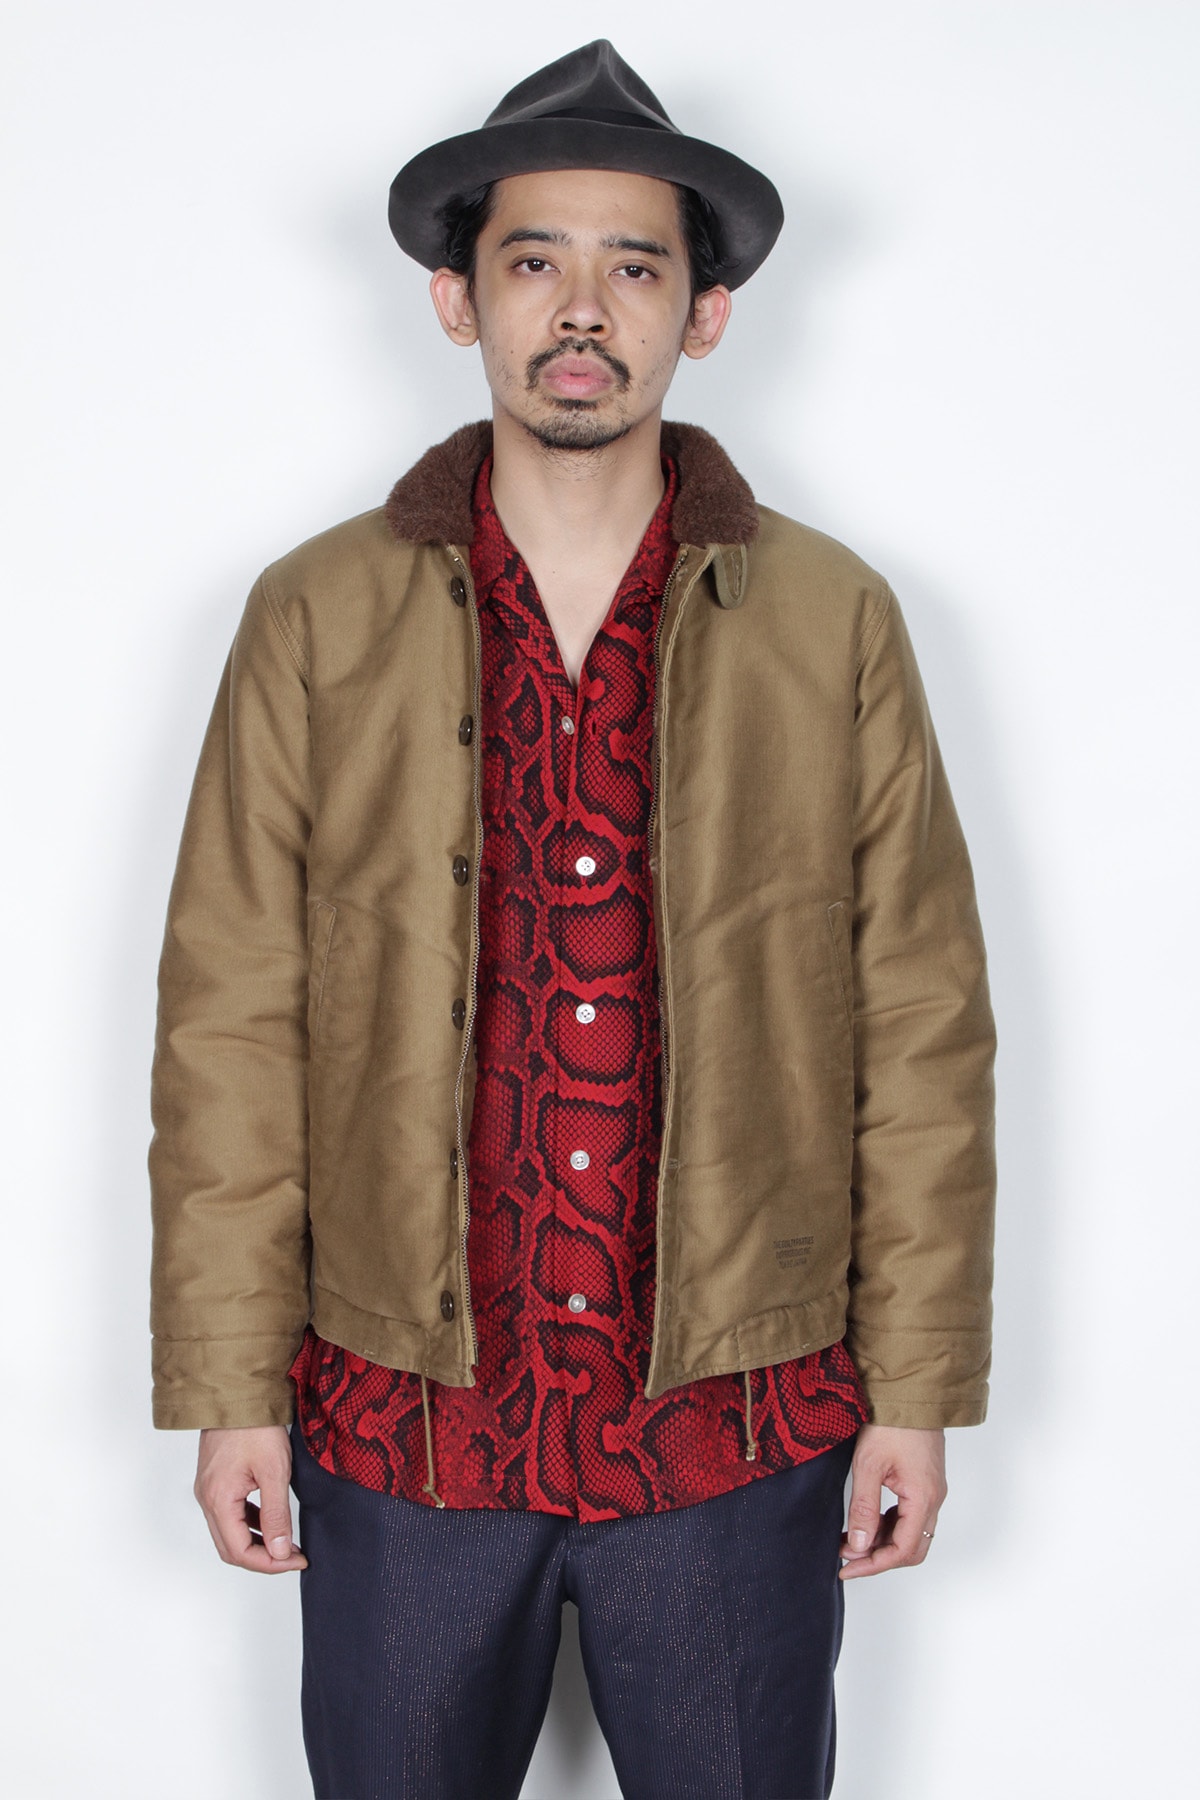 wacko maria dropped 2019 fall winter lookbook collection items leopard animal check ワコマリア 2019 秋冬 ルックブック アニマル柄 チェック 天国東京殺人音楽放送局 music arts film inspired themed collection